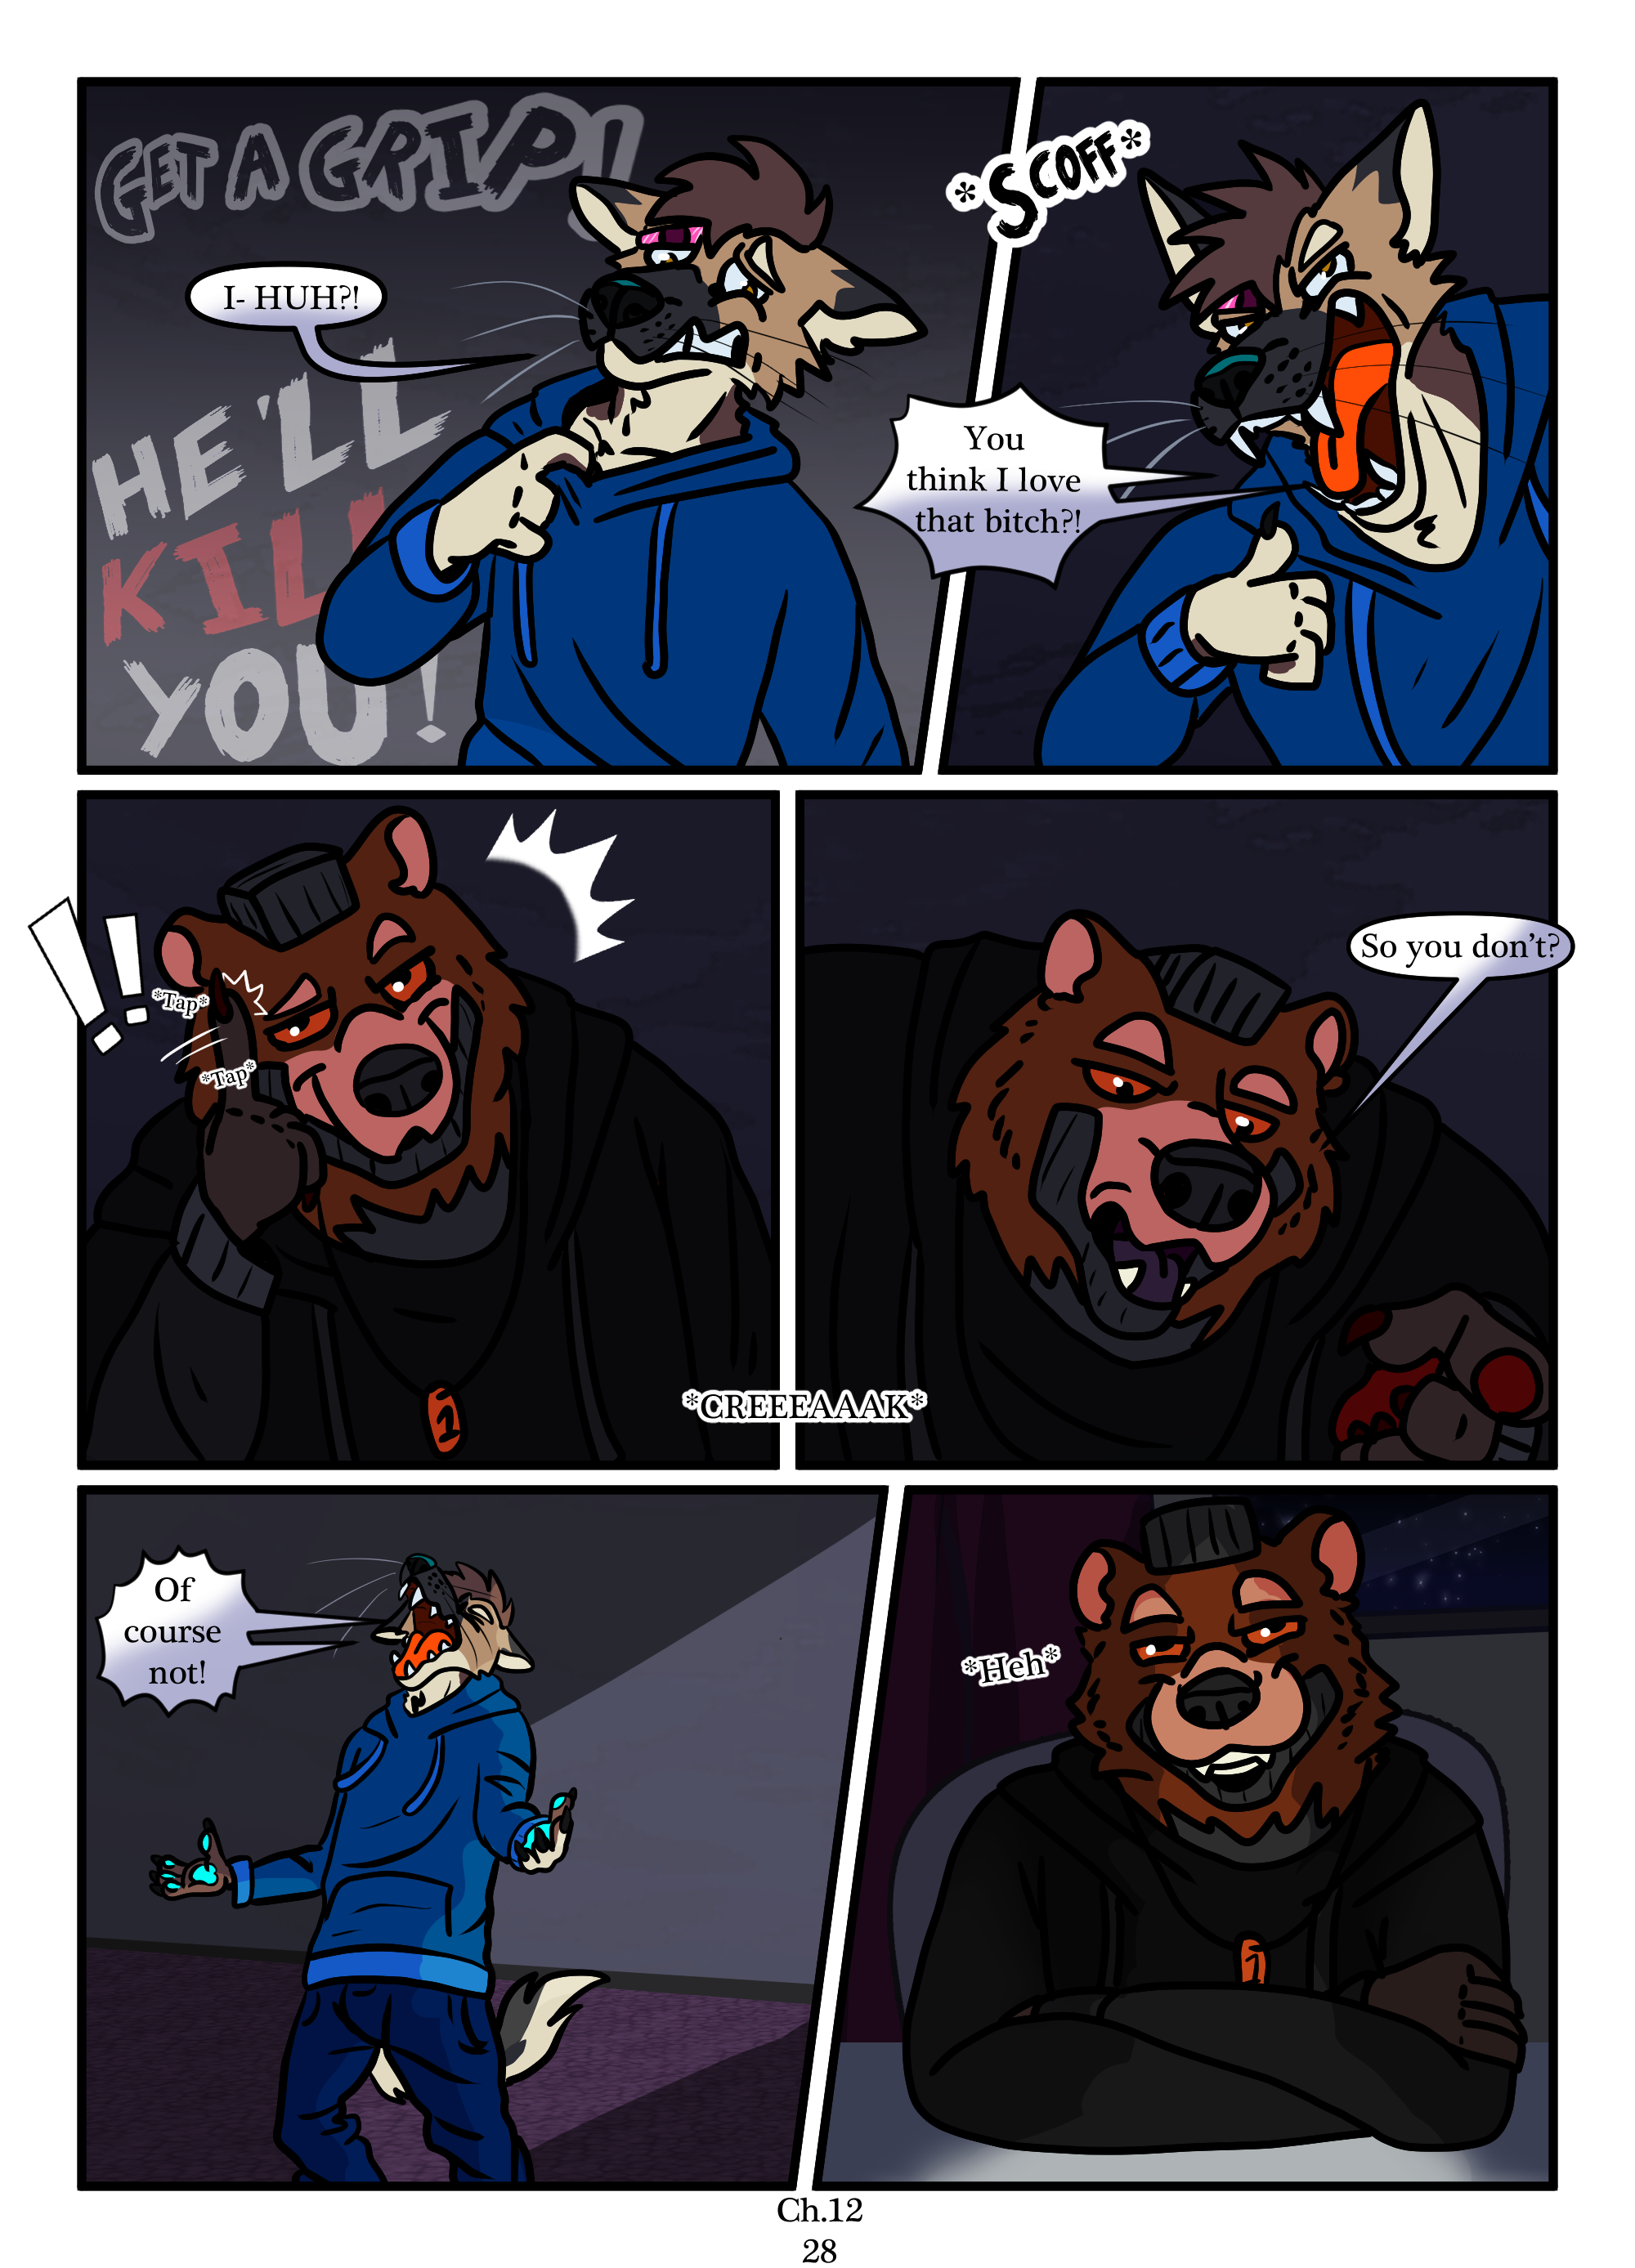 Ch.12 page 28